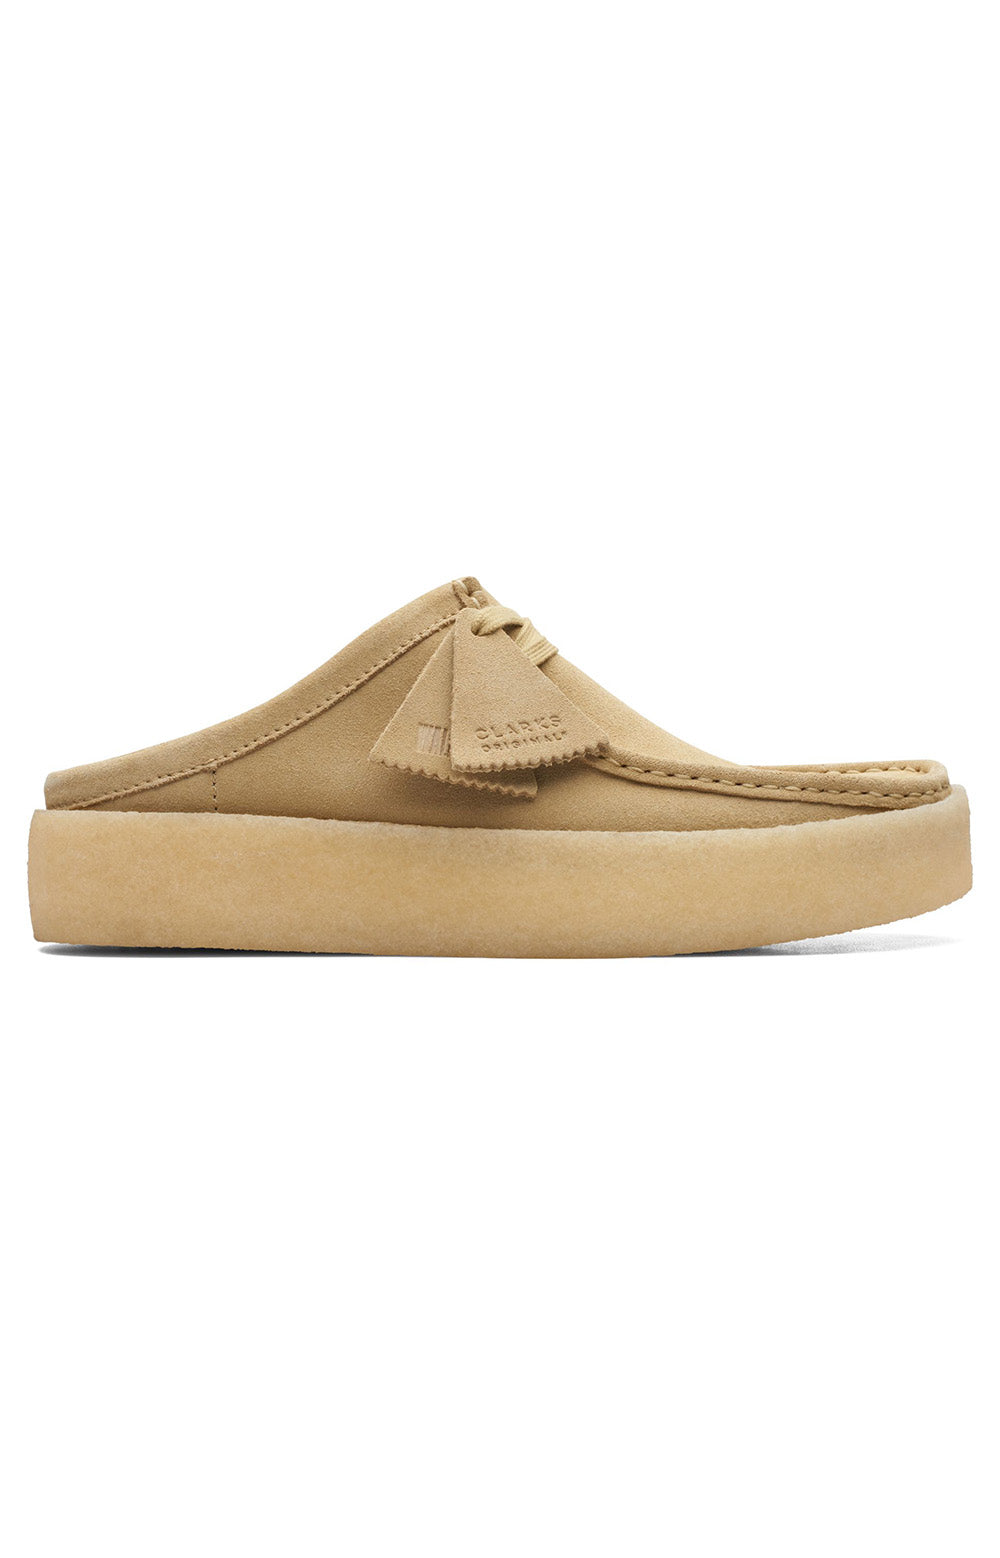 Clarks Originals Wallabee Cup Low Men's Maple Suede 26167286 shoe on white background